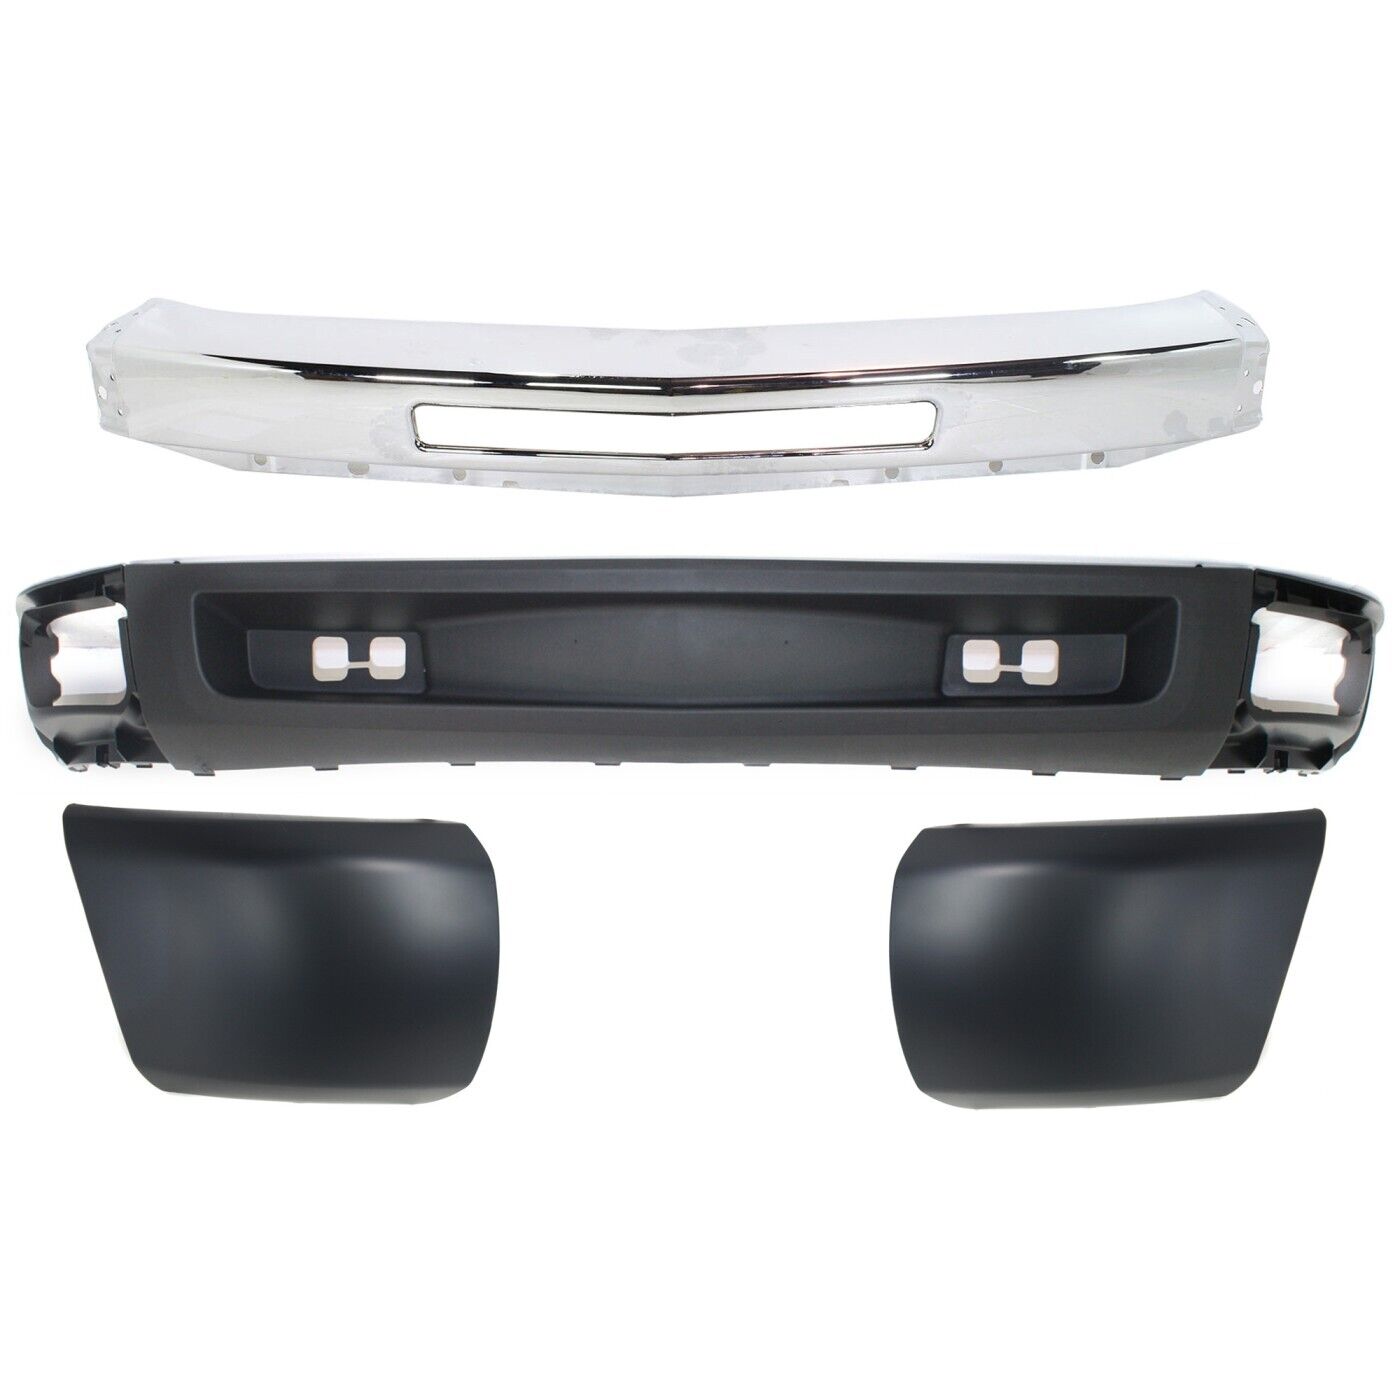 Front Bumper Kit For 2009-2013 Chevrolet Silverado 1500 with Valance Bumper Ends